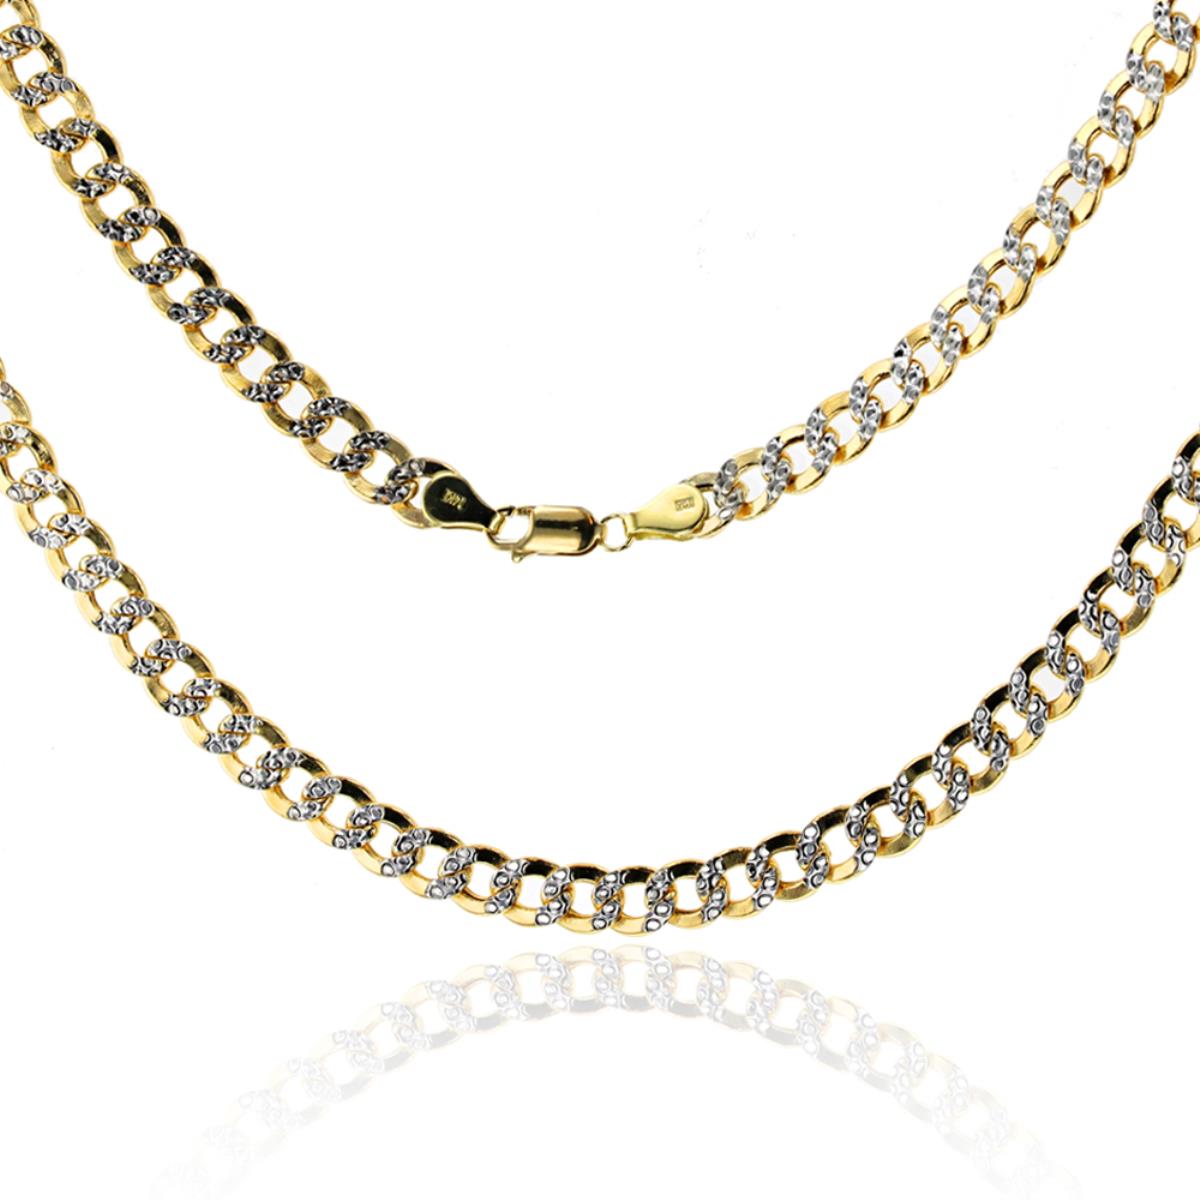 10K Yellow Gold 150 Hollow Cuban White Pave 24" Chain